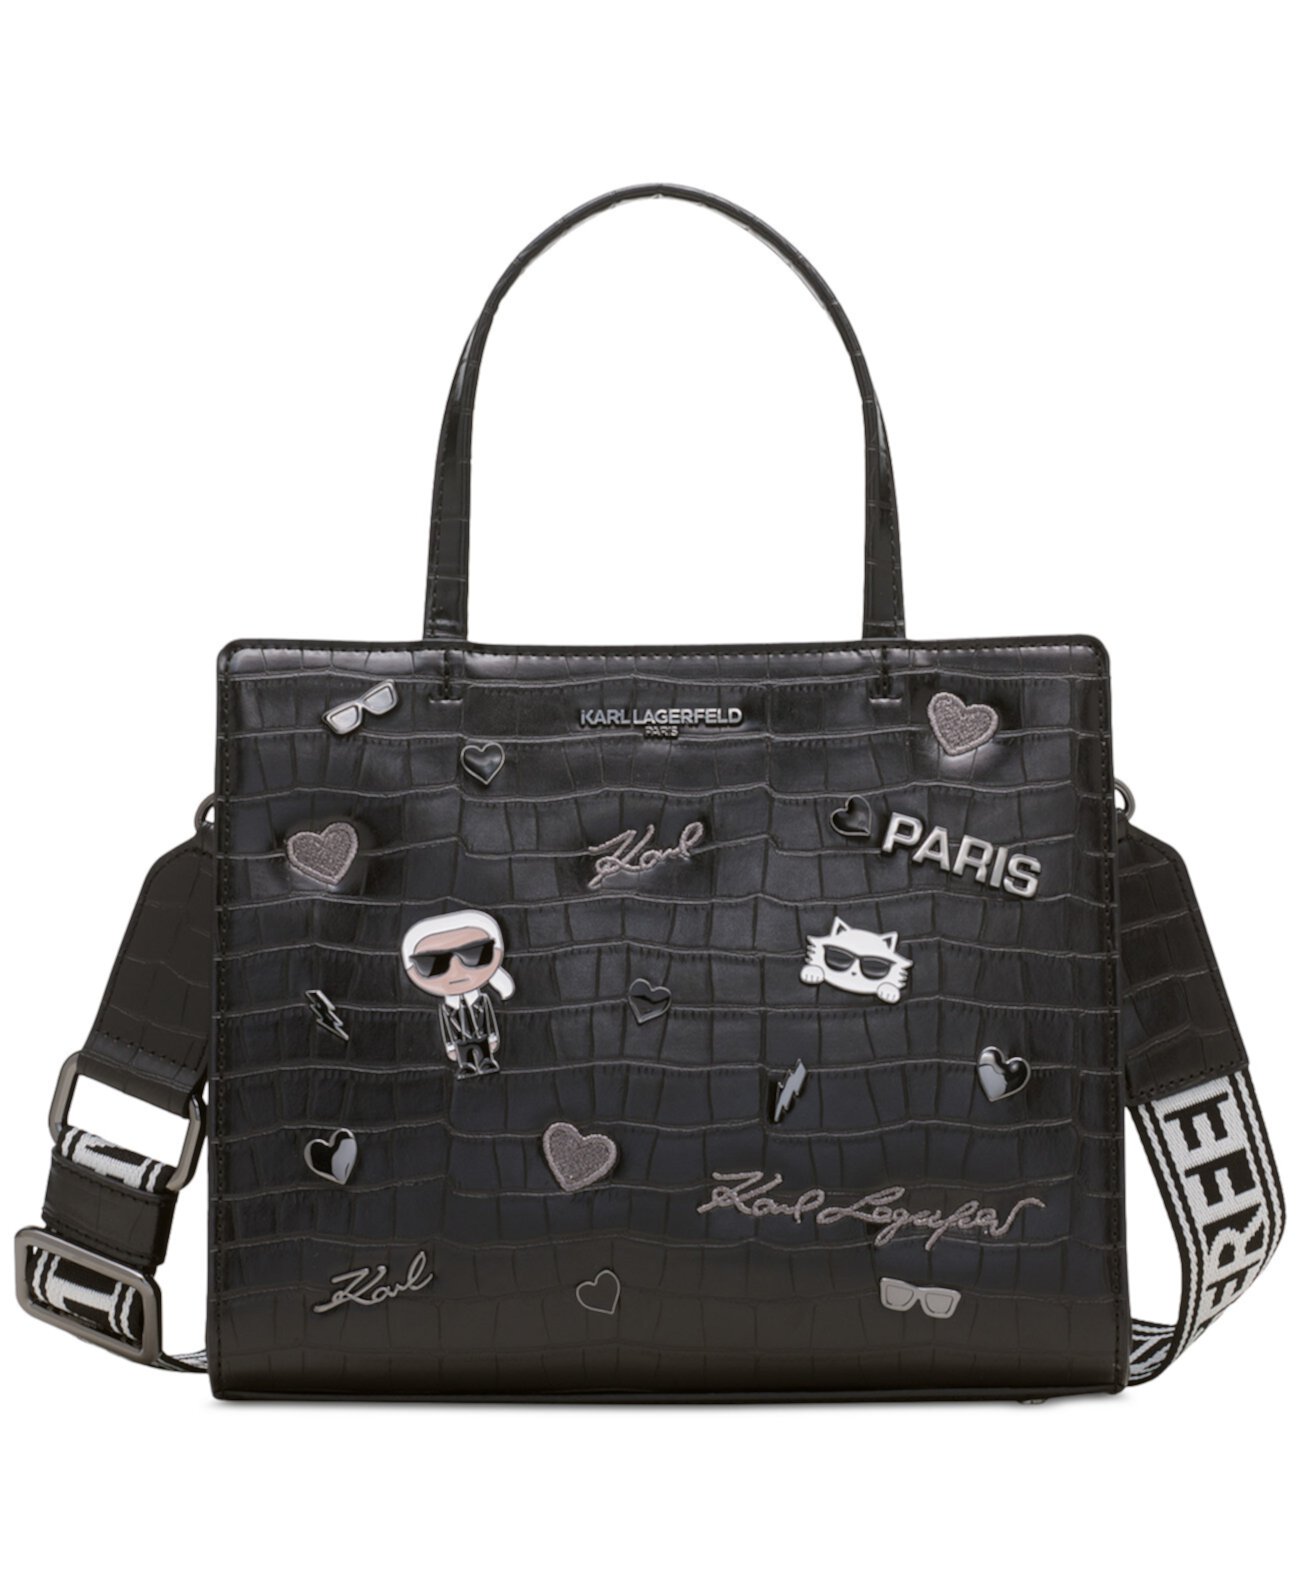 Maybelle Small Leather Satchel Karl Lagerfeld Paris